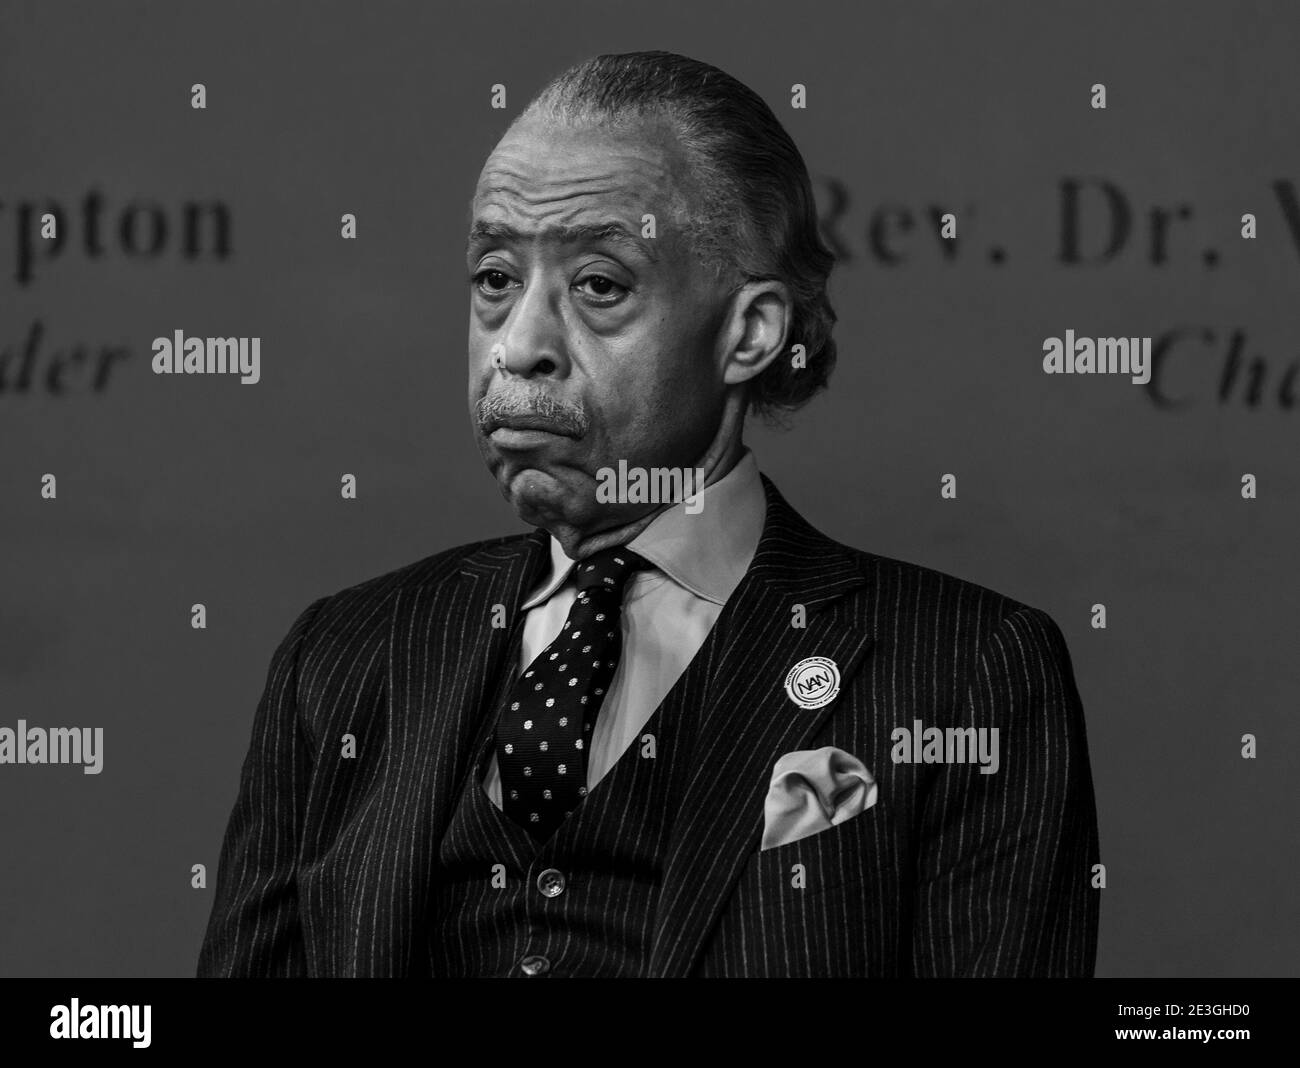 New York, United States. 18th Jan, 2021. Reverend Al Sharpton seen on stage during Martin Luther King celebration at NAN headquarters. Reverend Al Sharpton and National Action Network (NAN) hosted prominent clergy, elected officials and civil rights leaders at the House of Justice for their Annual Martin Luther King Day Public Policy Forum to honor the legacy of the Rev. Dr. Martin Luther King, Jr. (Photo by Lev Radin/Pacific Press) Credit: Pacific Press Media Production Corp./Alamy Live News Stock Photo